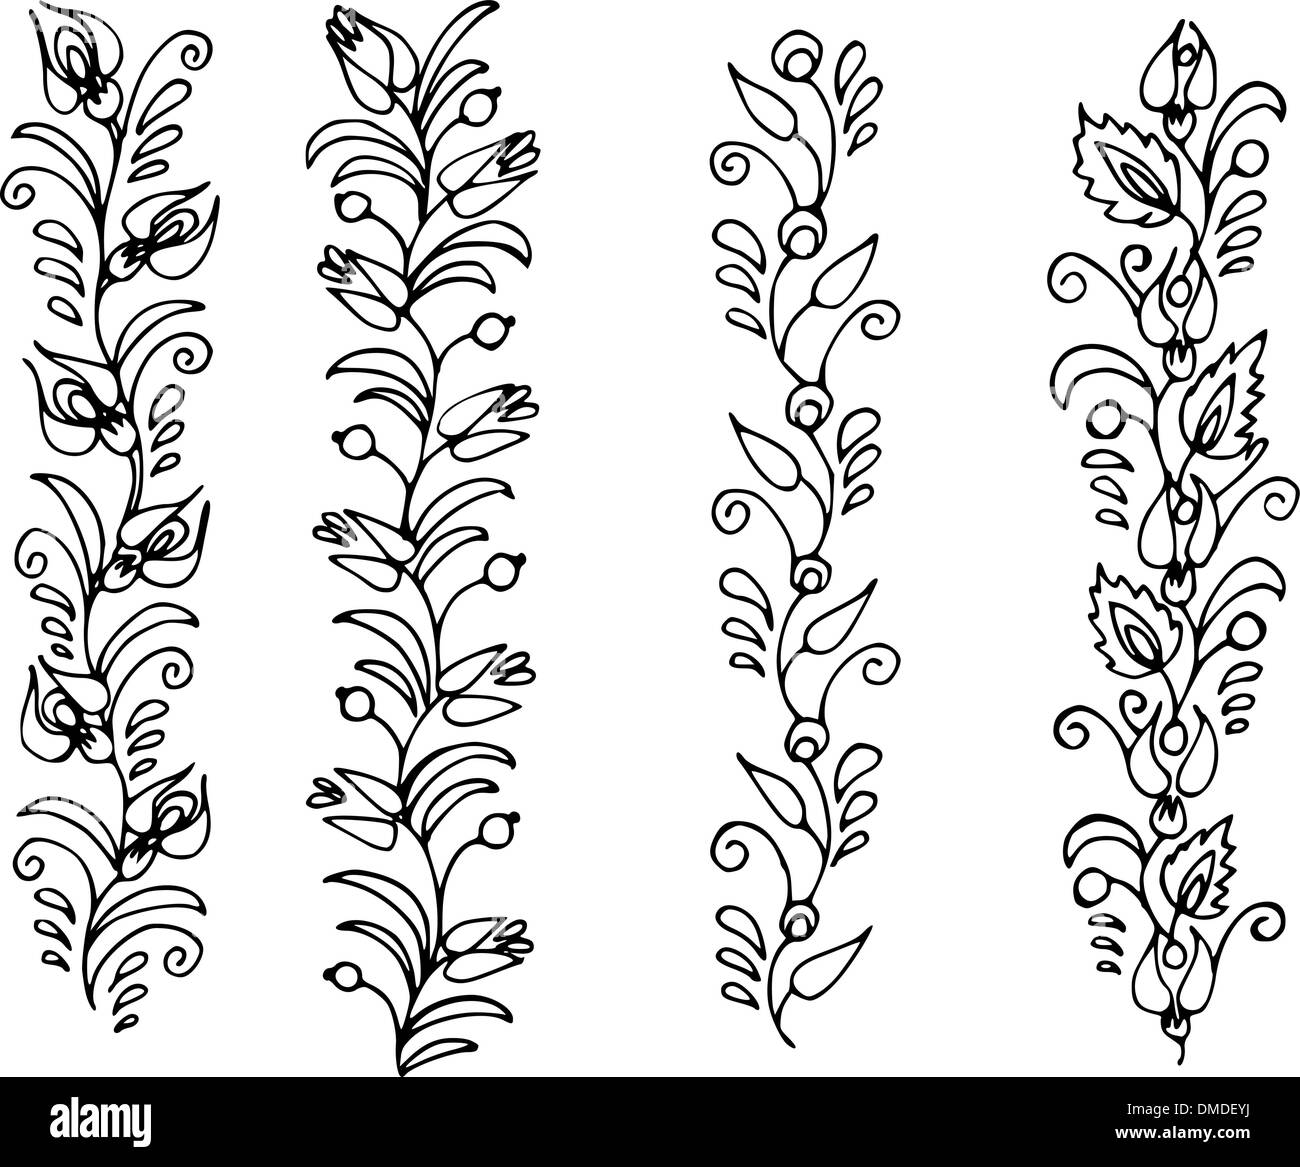 Frieze pattern Black and White Stock Photos & Images - Alamy